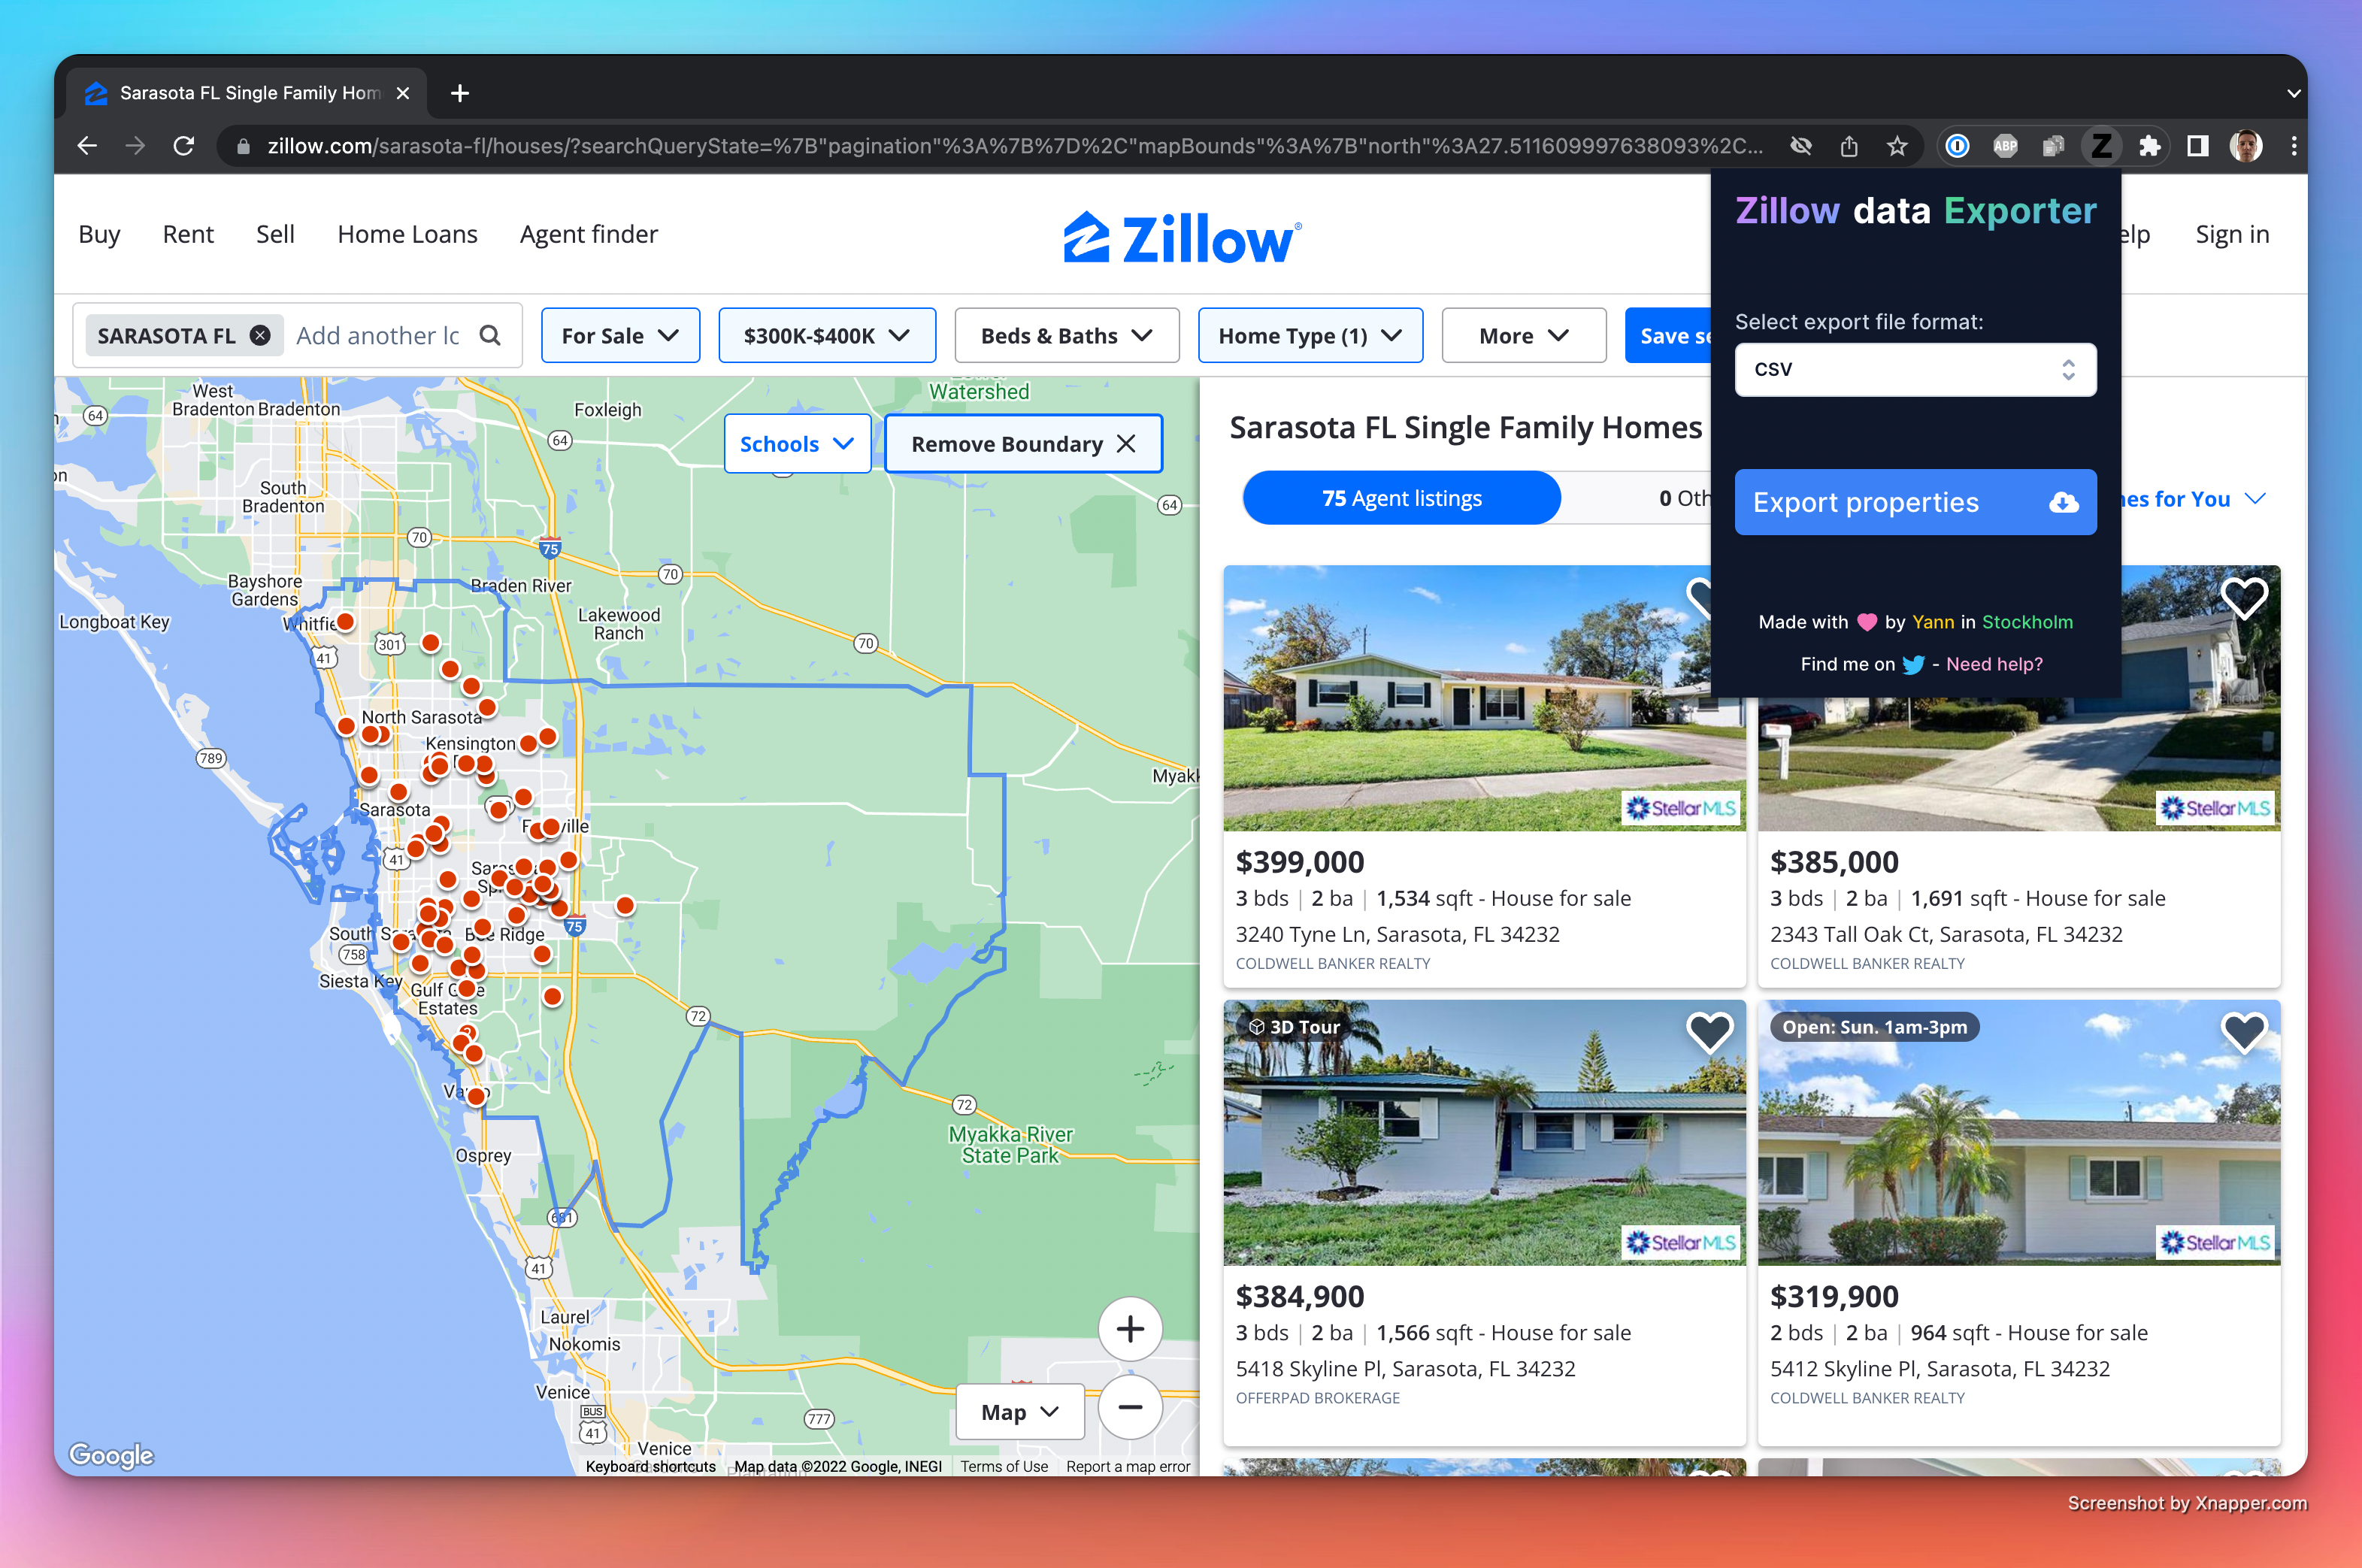 Image of Zillow Data Exporter Chrome extension with the CSV option selected